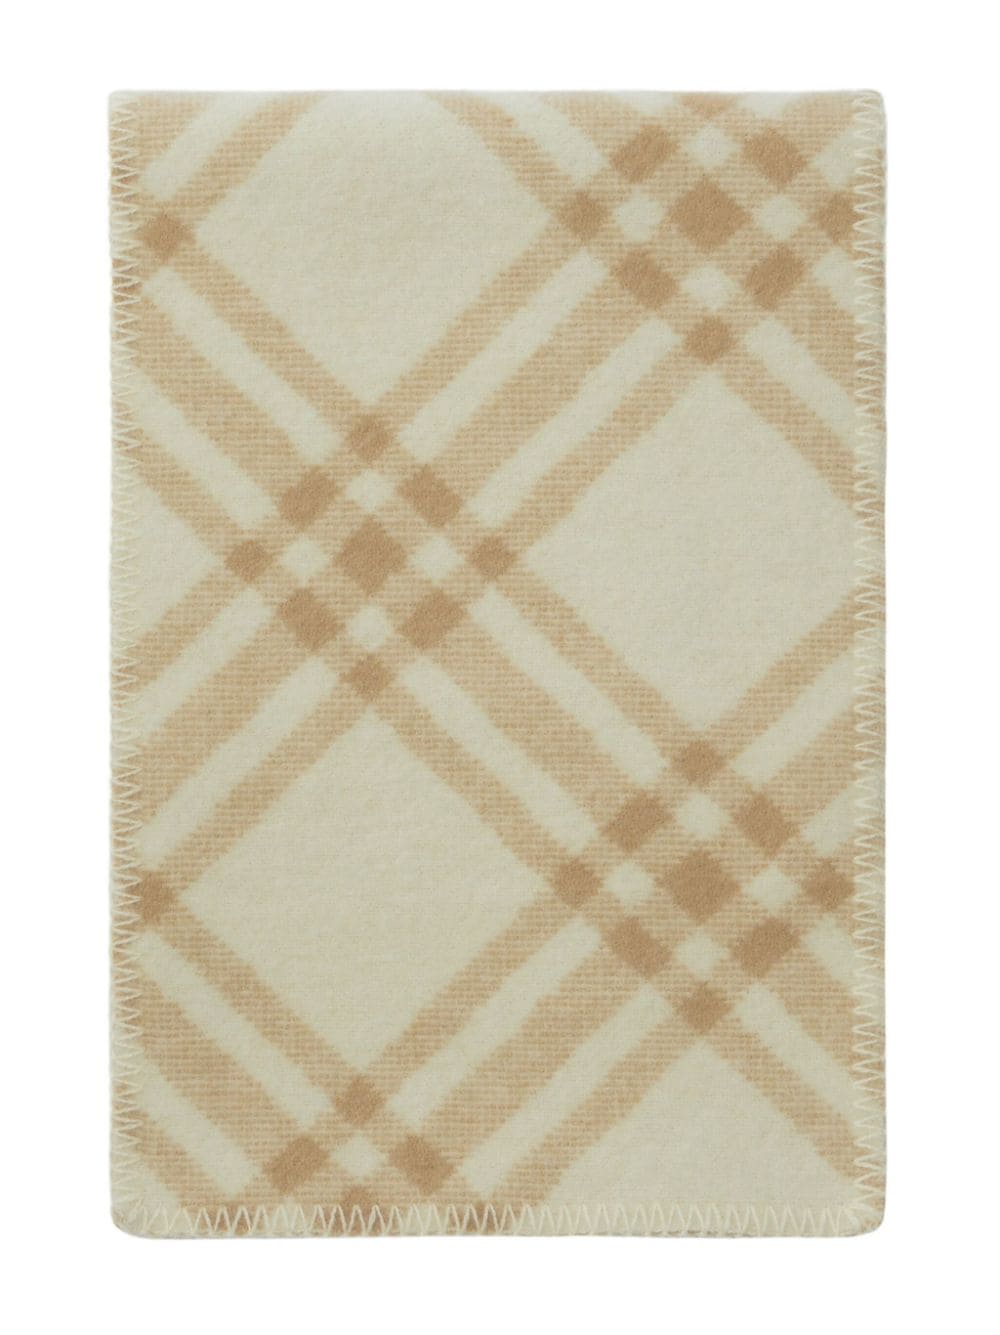 BURBERRY Check Wool Scarf